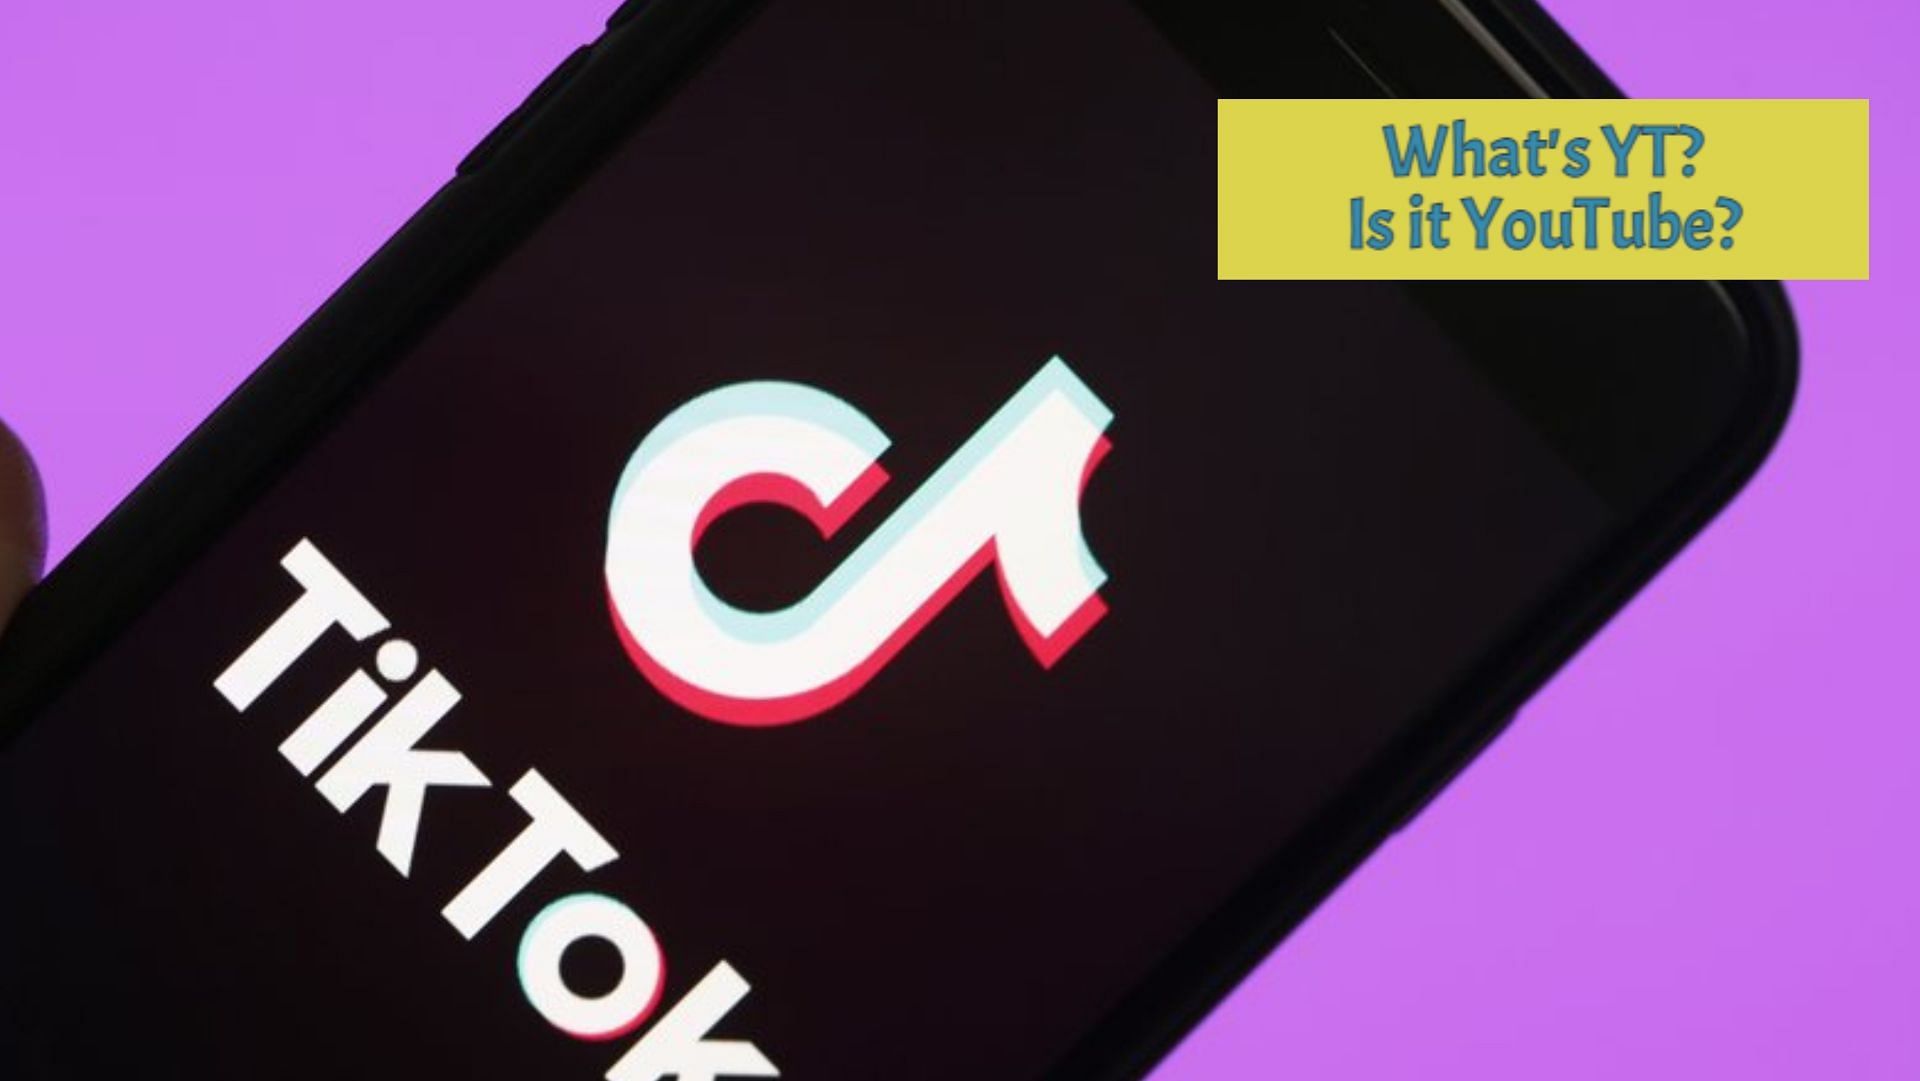 TikTok users explore the viral acronym YT. And no, it doesn